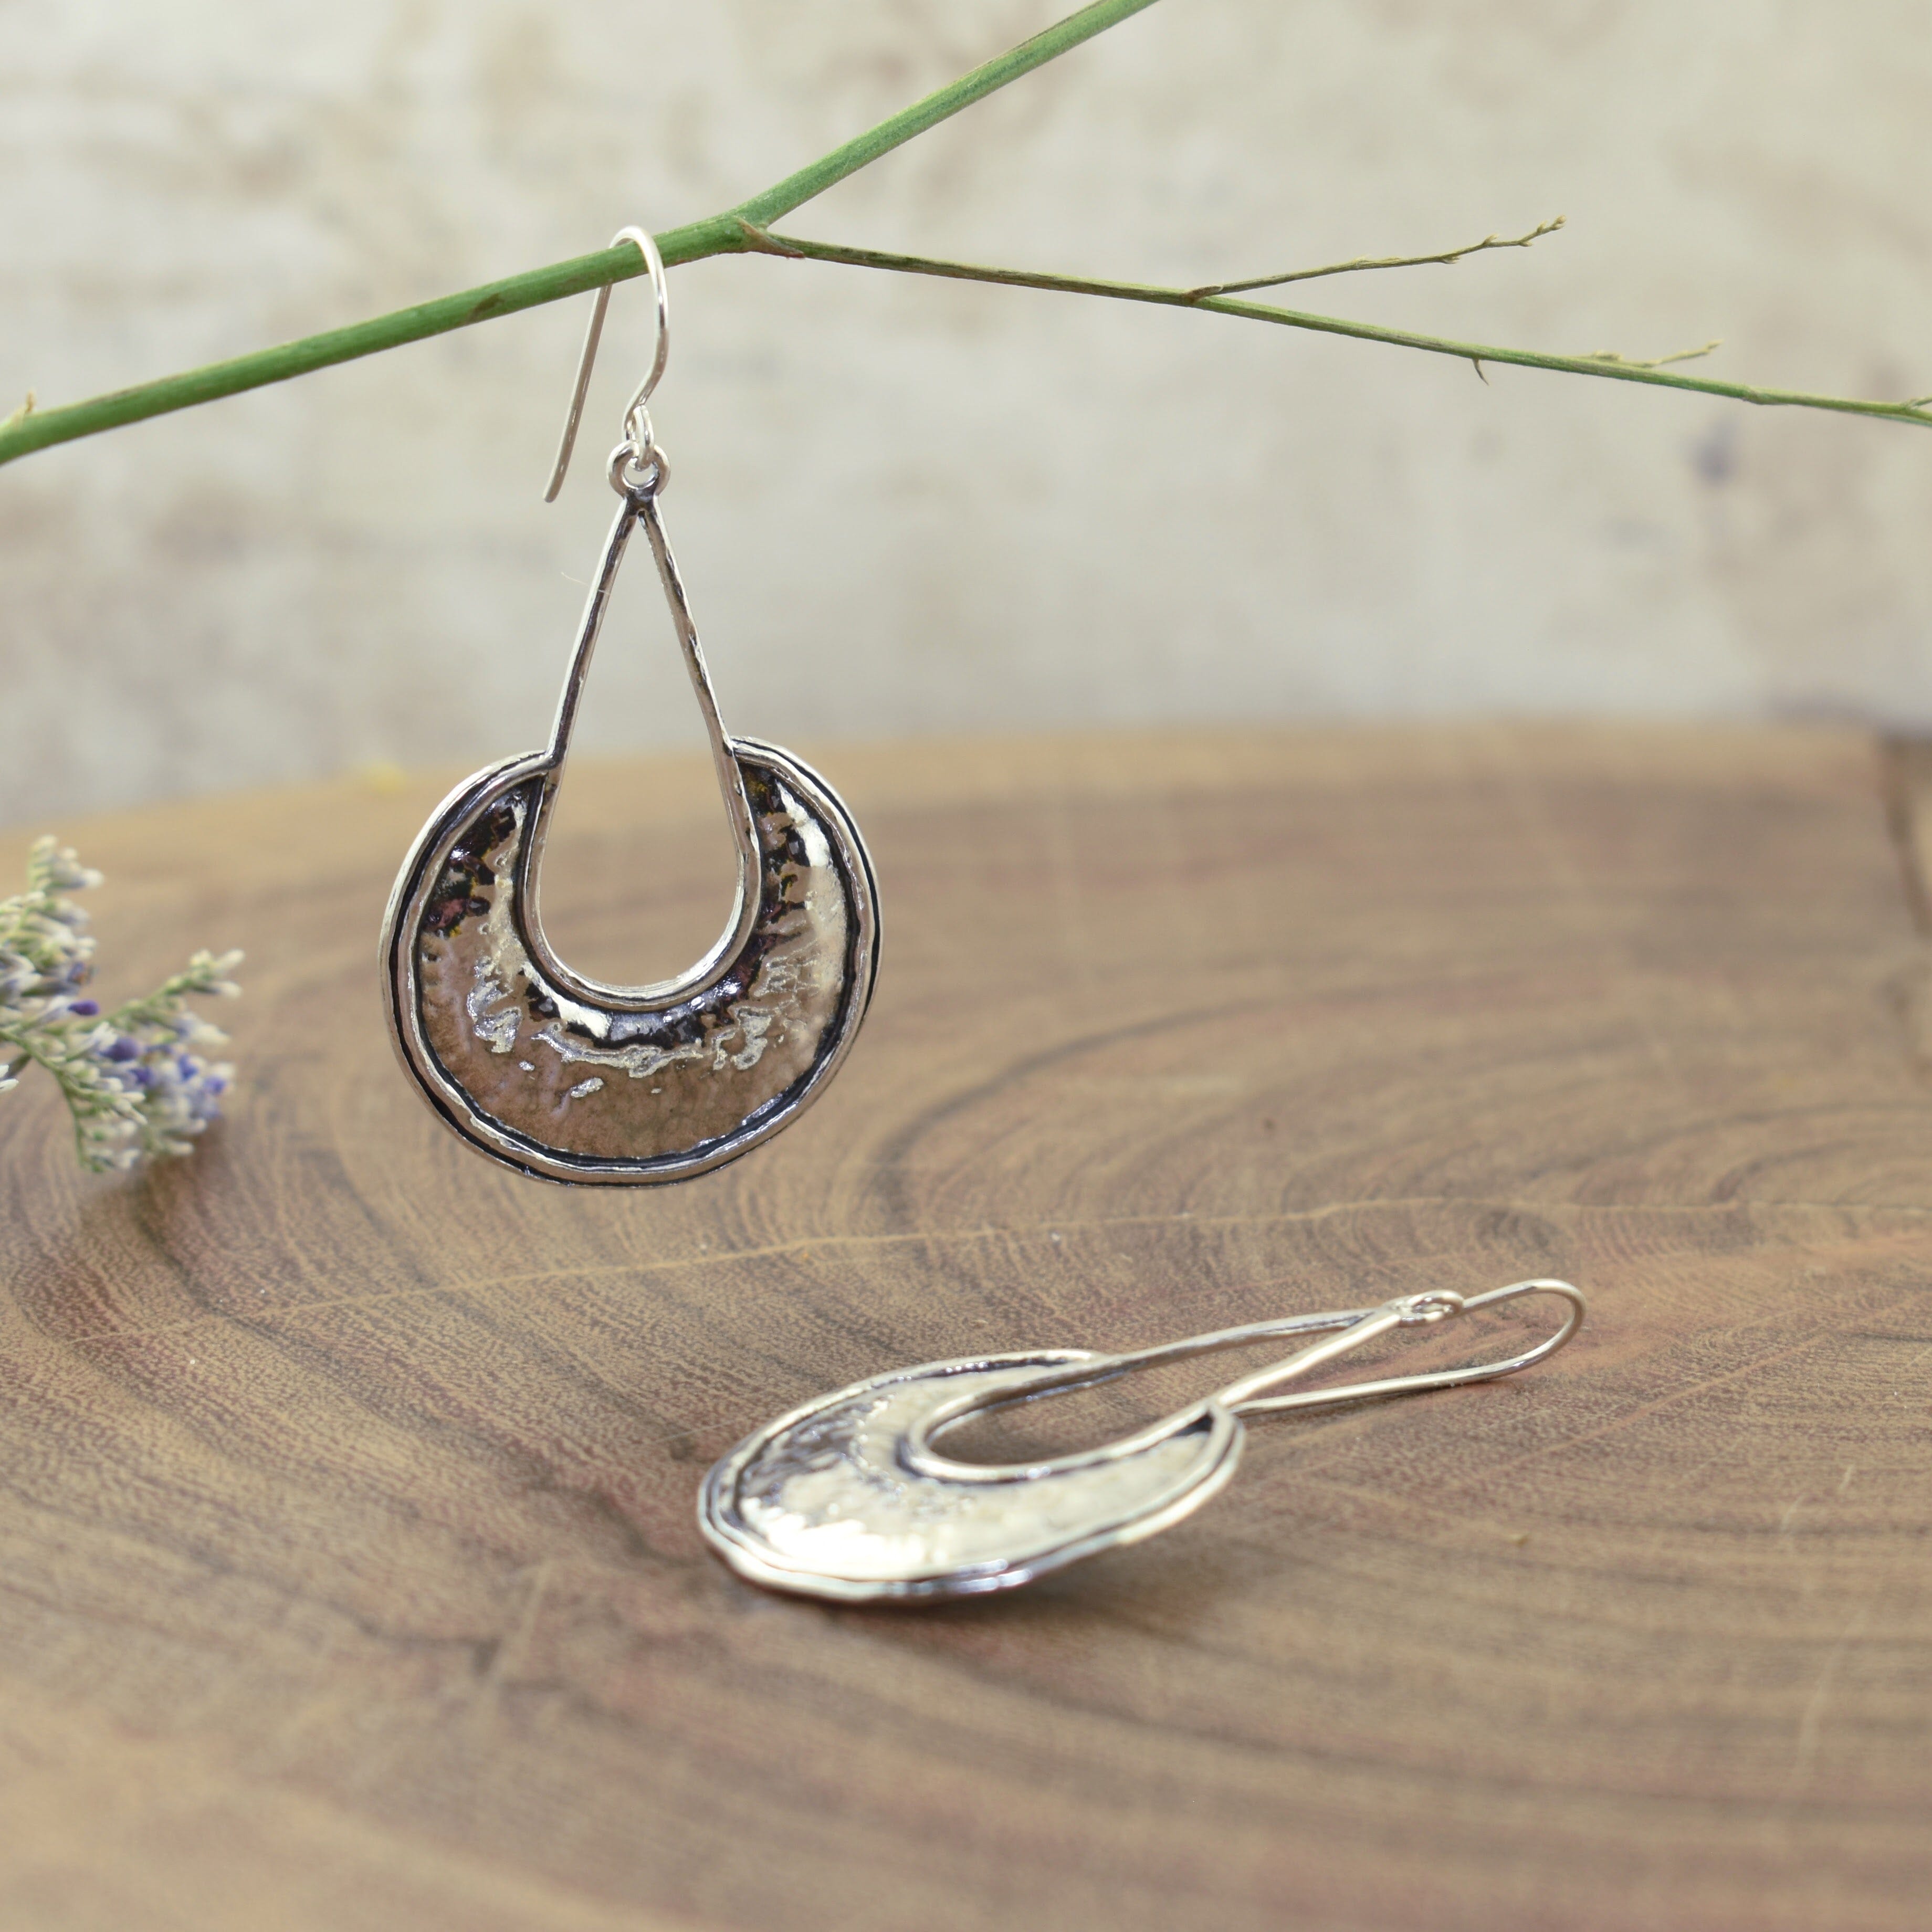 dangling hook earrings with a hammered finish